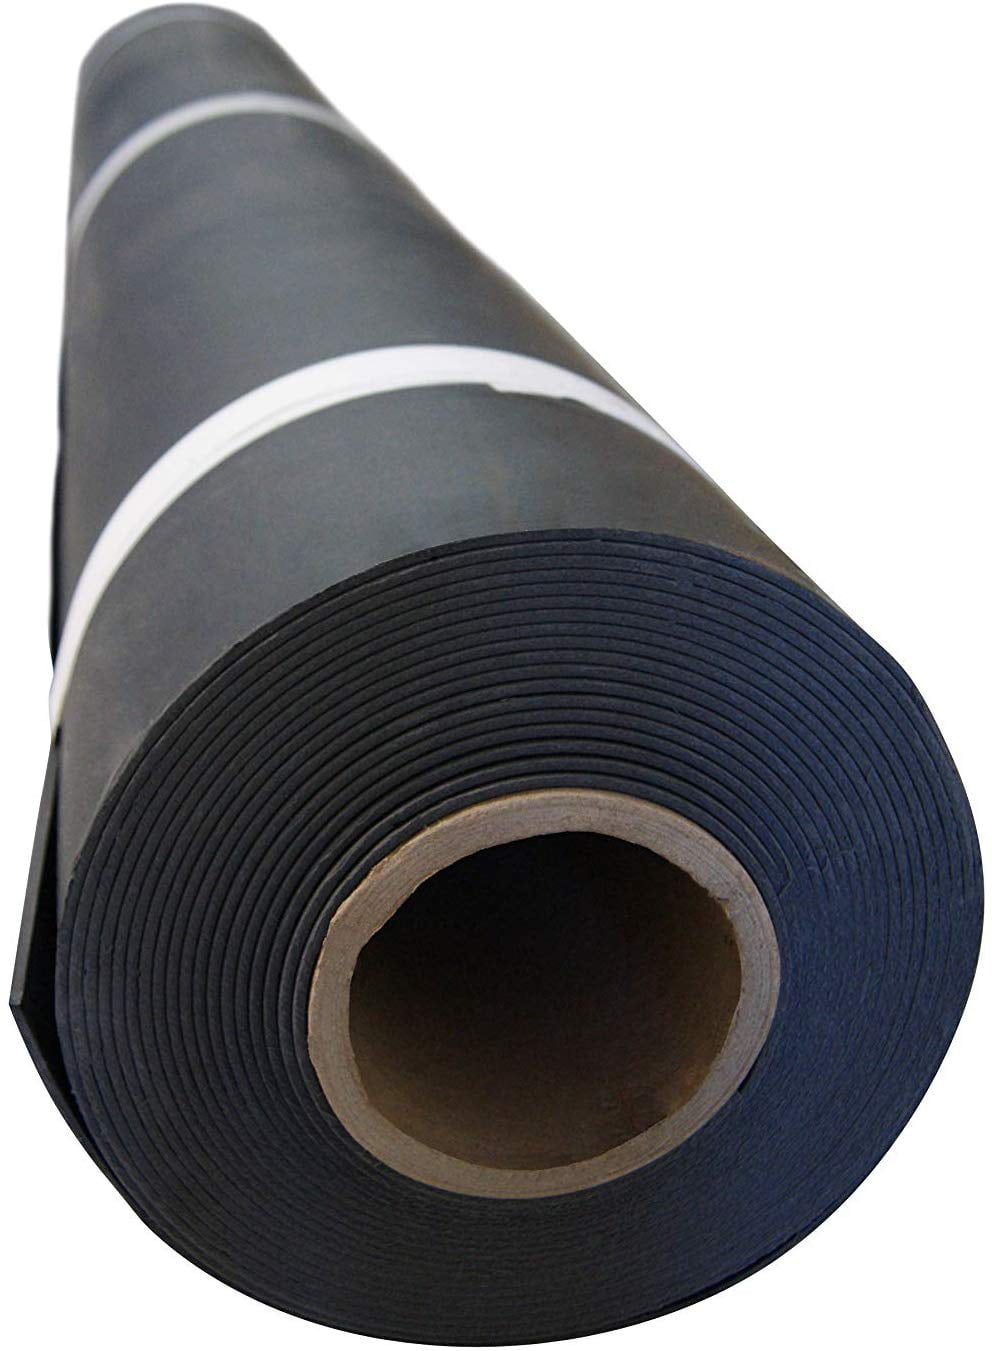 TotalMass Mass Loaded Vinyl MLV Barrier 4' x 25' 1 lb One Pound 100 Square Foot Roll Soundproofing Acoustic Barrier